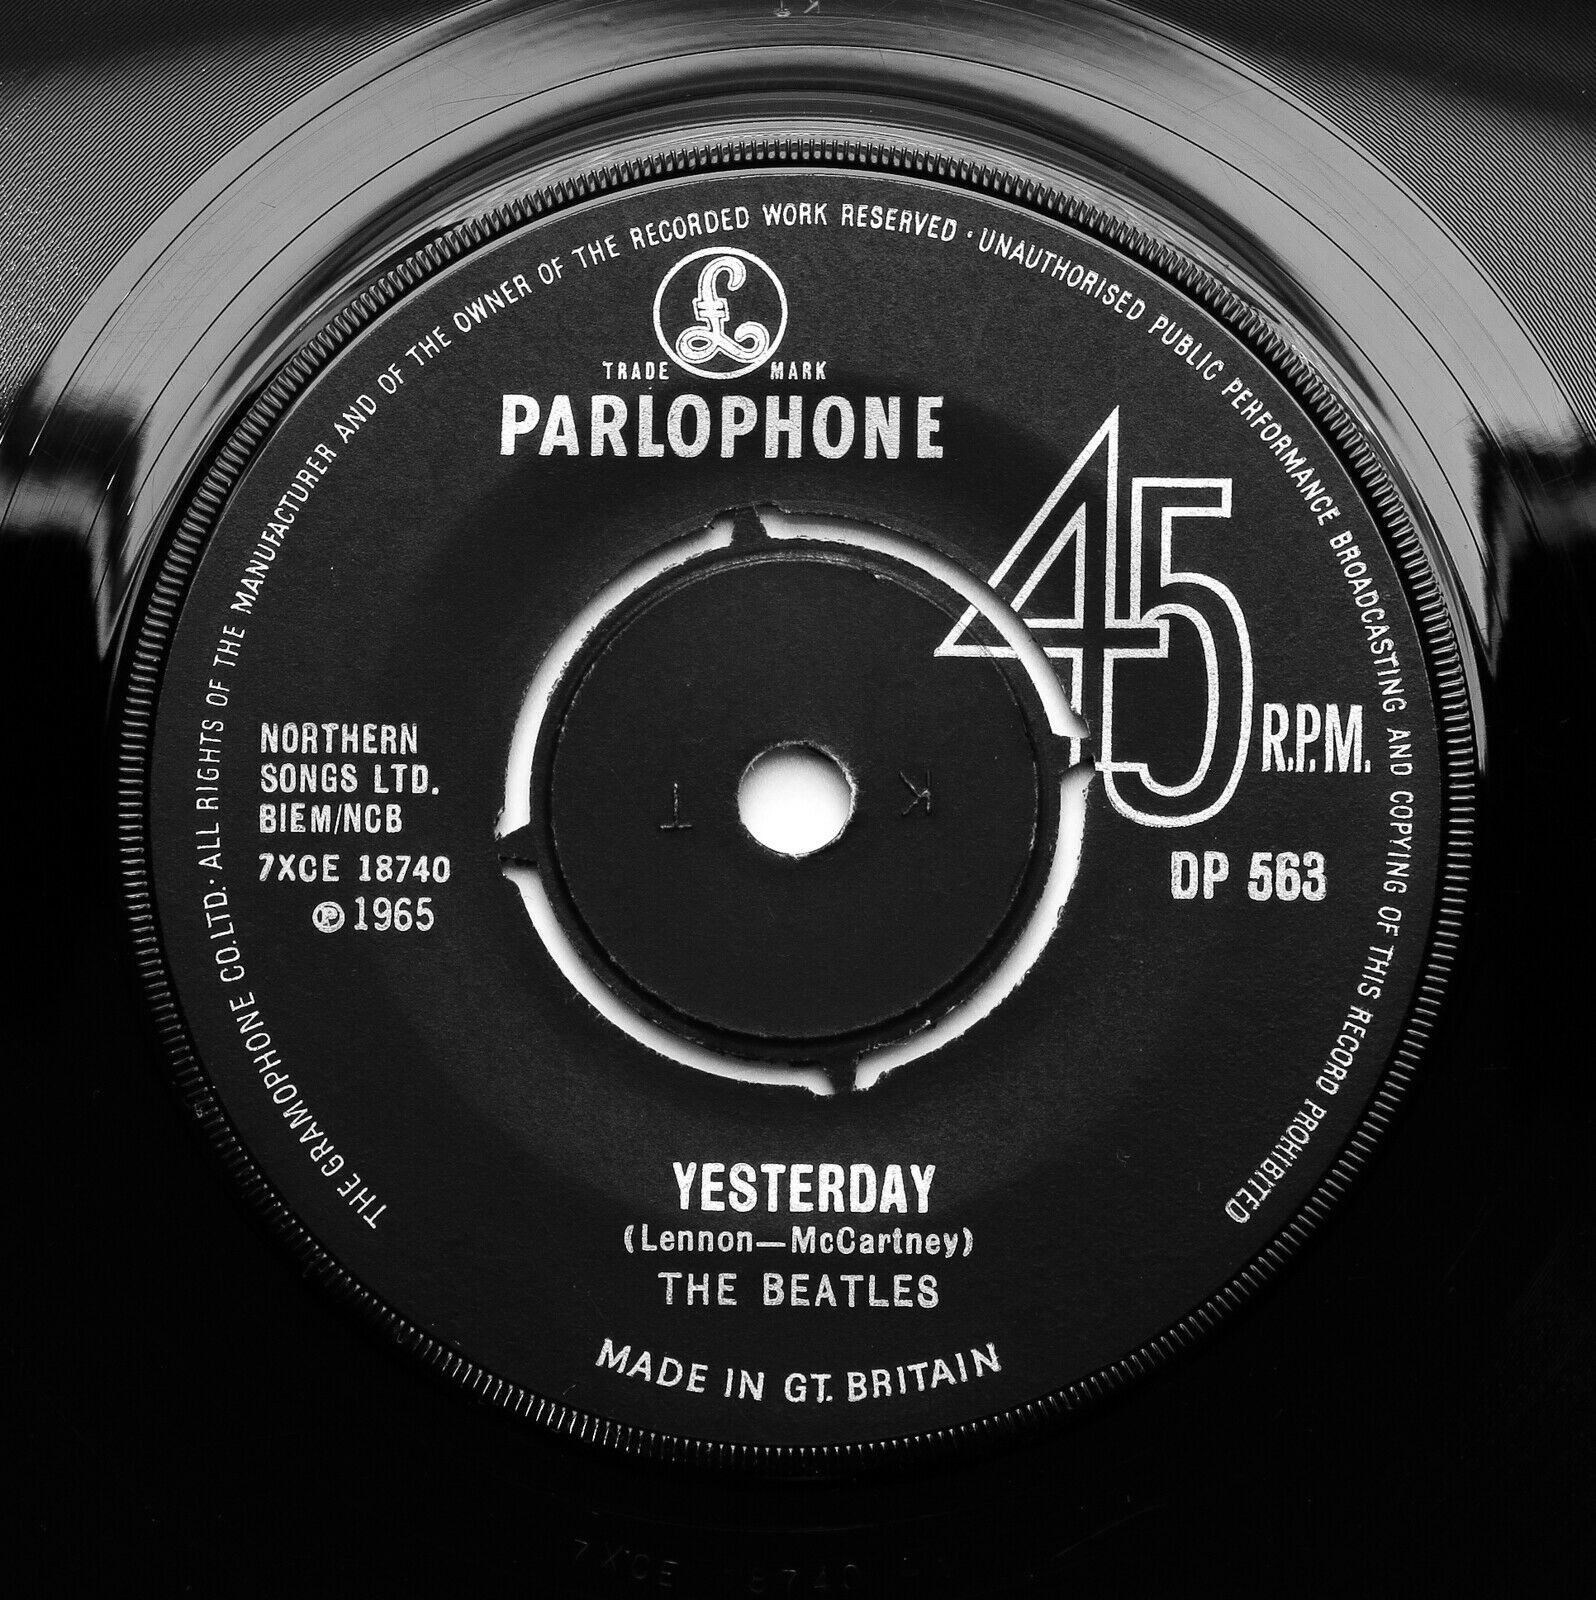 Pic 1 The Beatles - Yesterday/Dizzy Miss Lizzy - UK 1965 *EXPORT* 45 DP 563 1/G